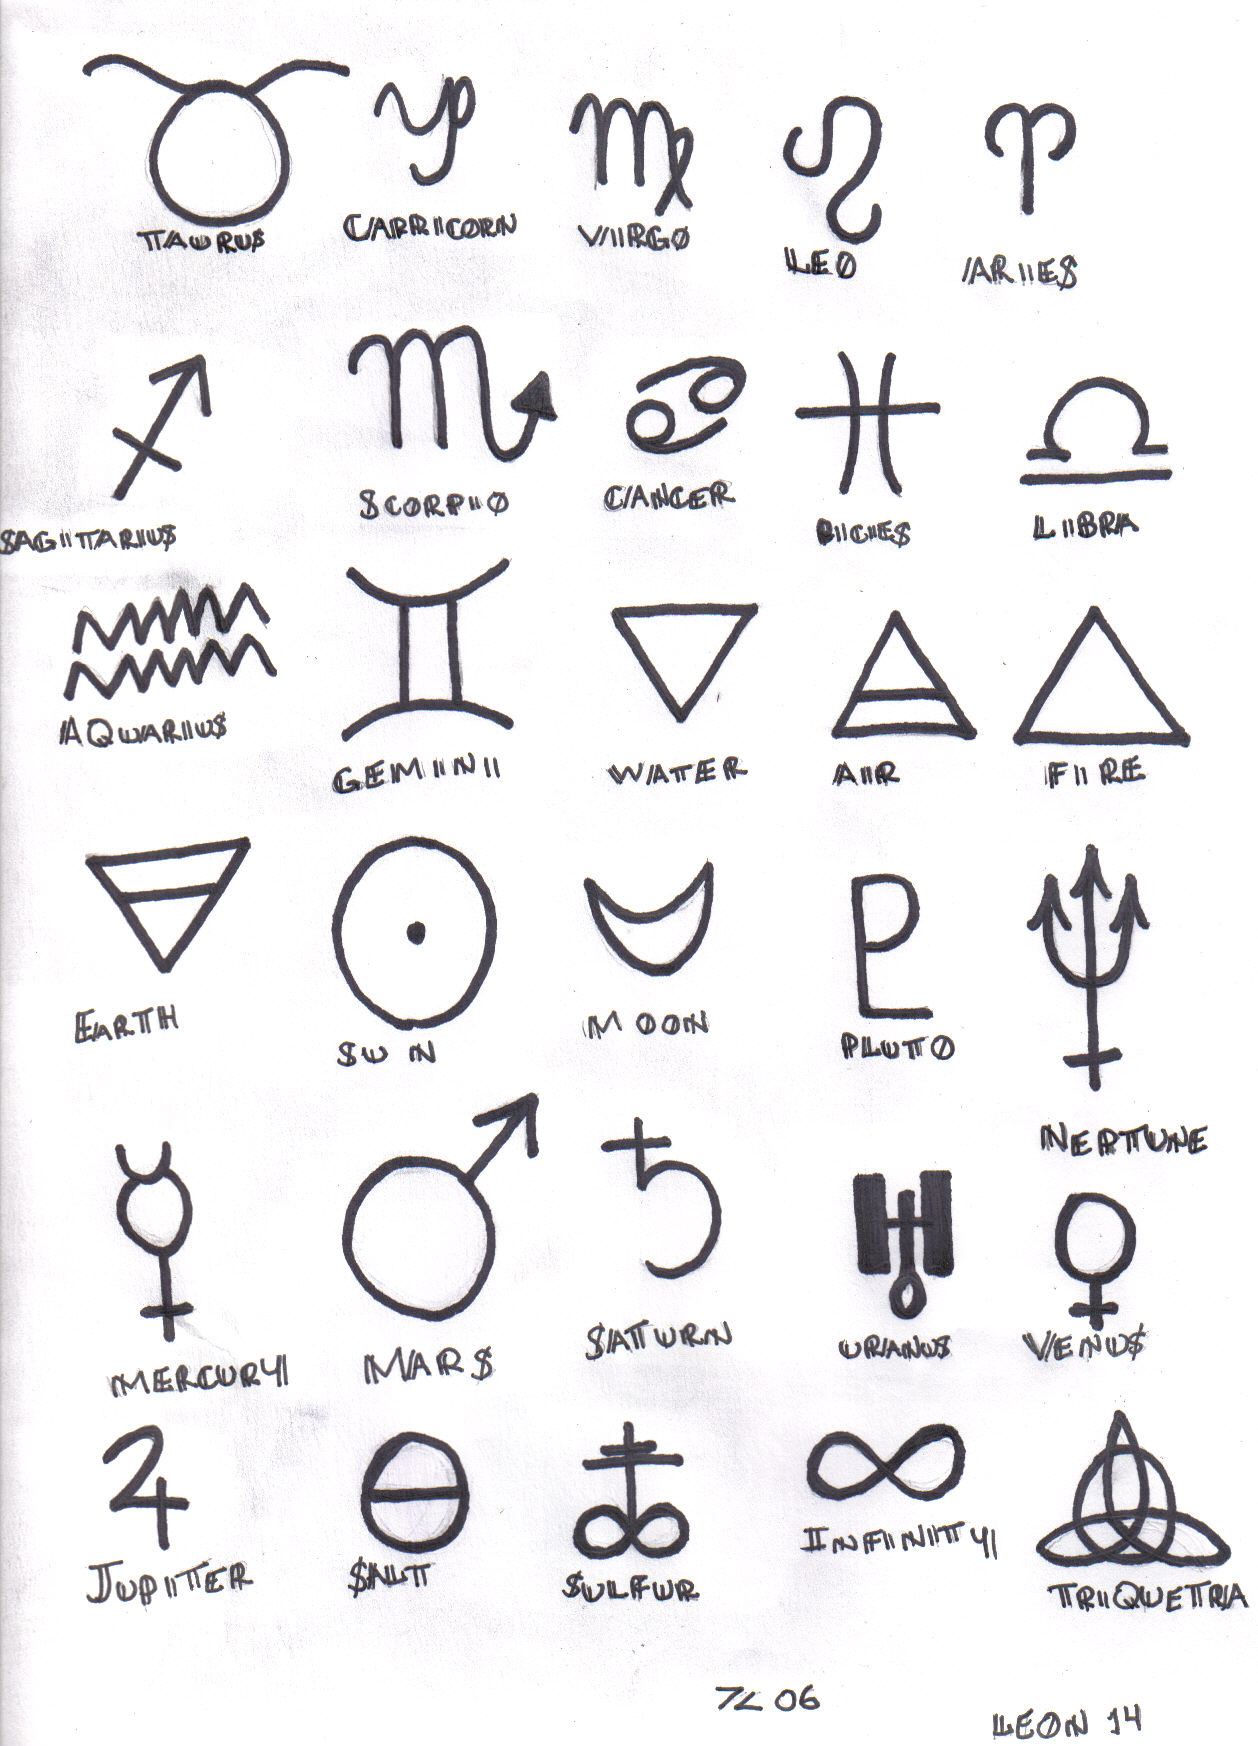 Ancient Symbols and Their Meanings